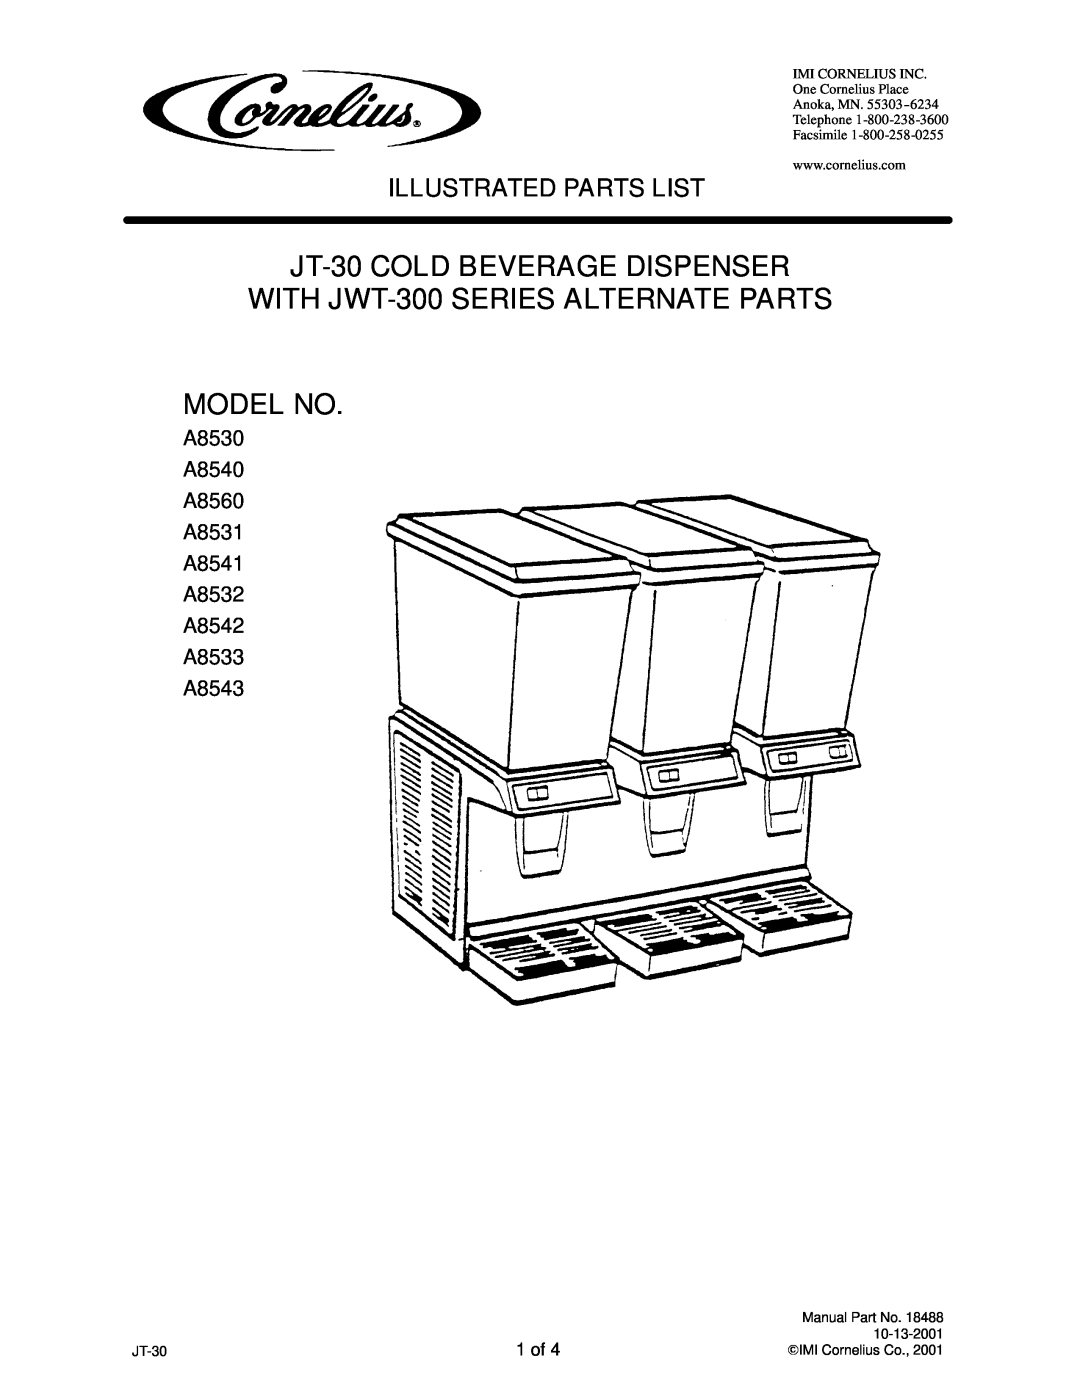 Cornelius A8560 manual JT-30COLD BEVERAGE DISPENSER, WITH JWT-300SERIES ALTERNATE PARTS MODEL NO, Illustrated Parts List 